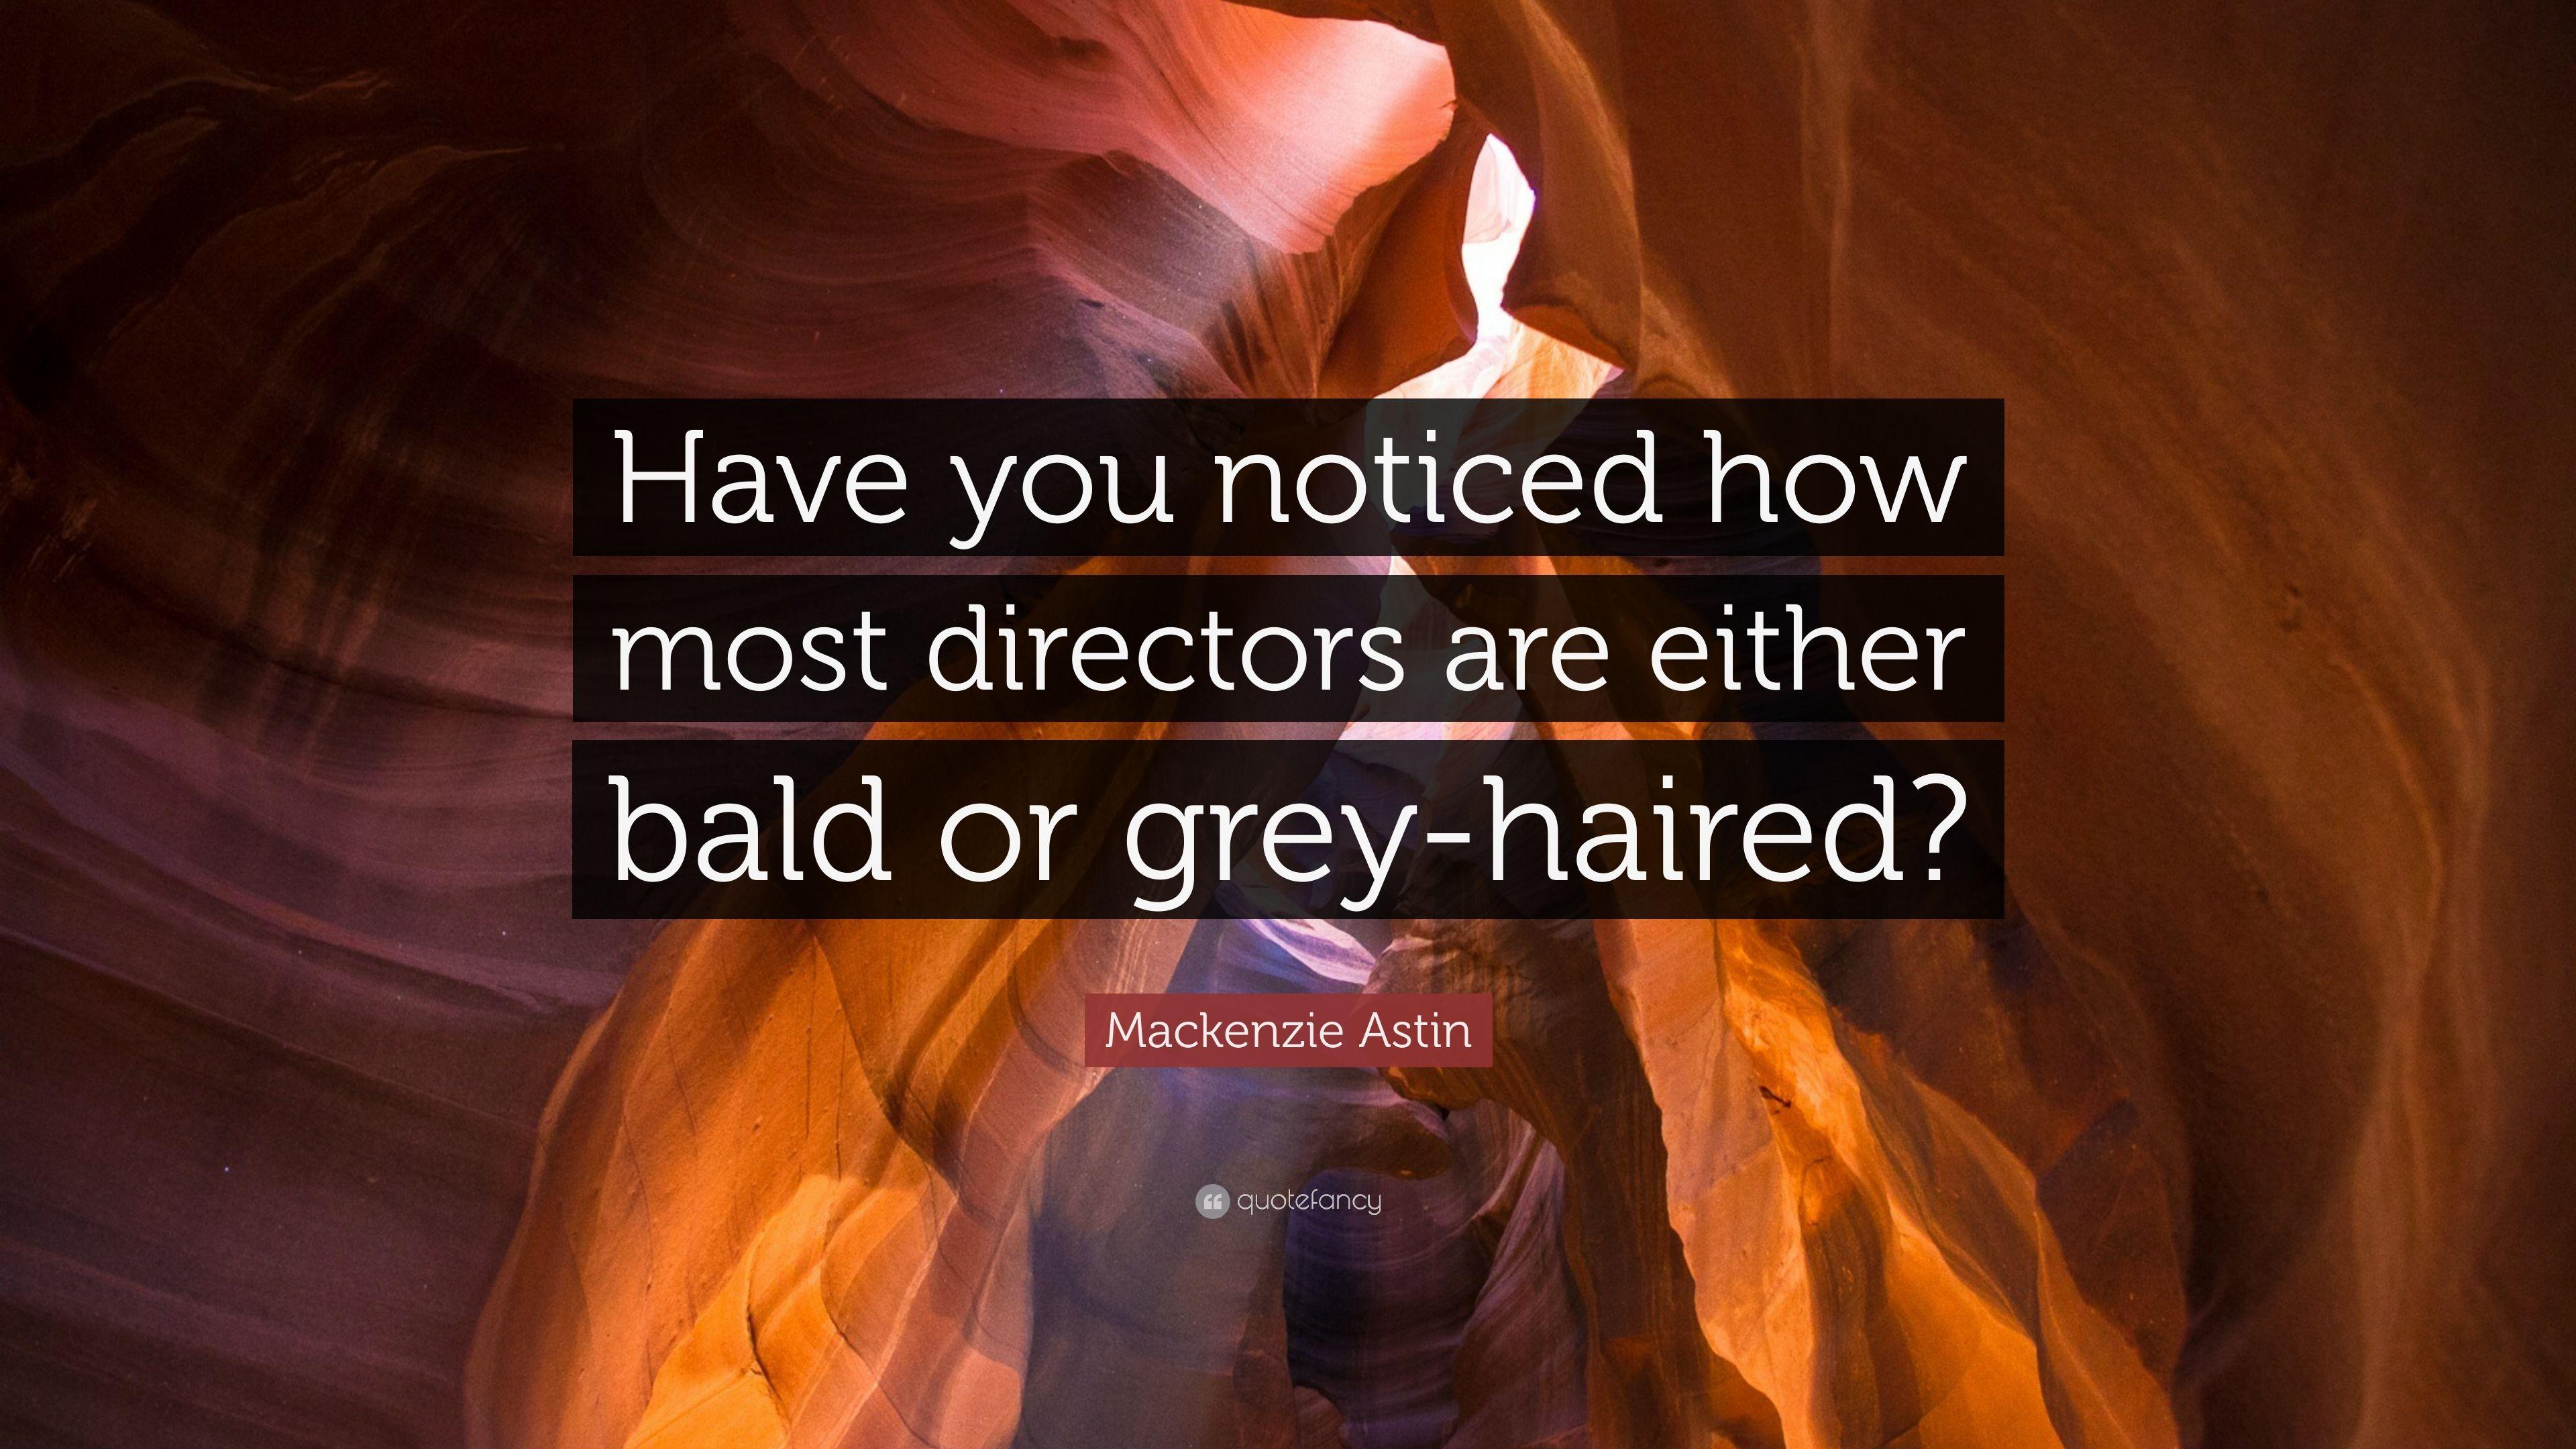 Mackenzie Astin Quote: “Have you noticed how most directors are